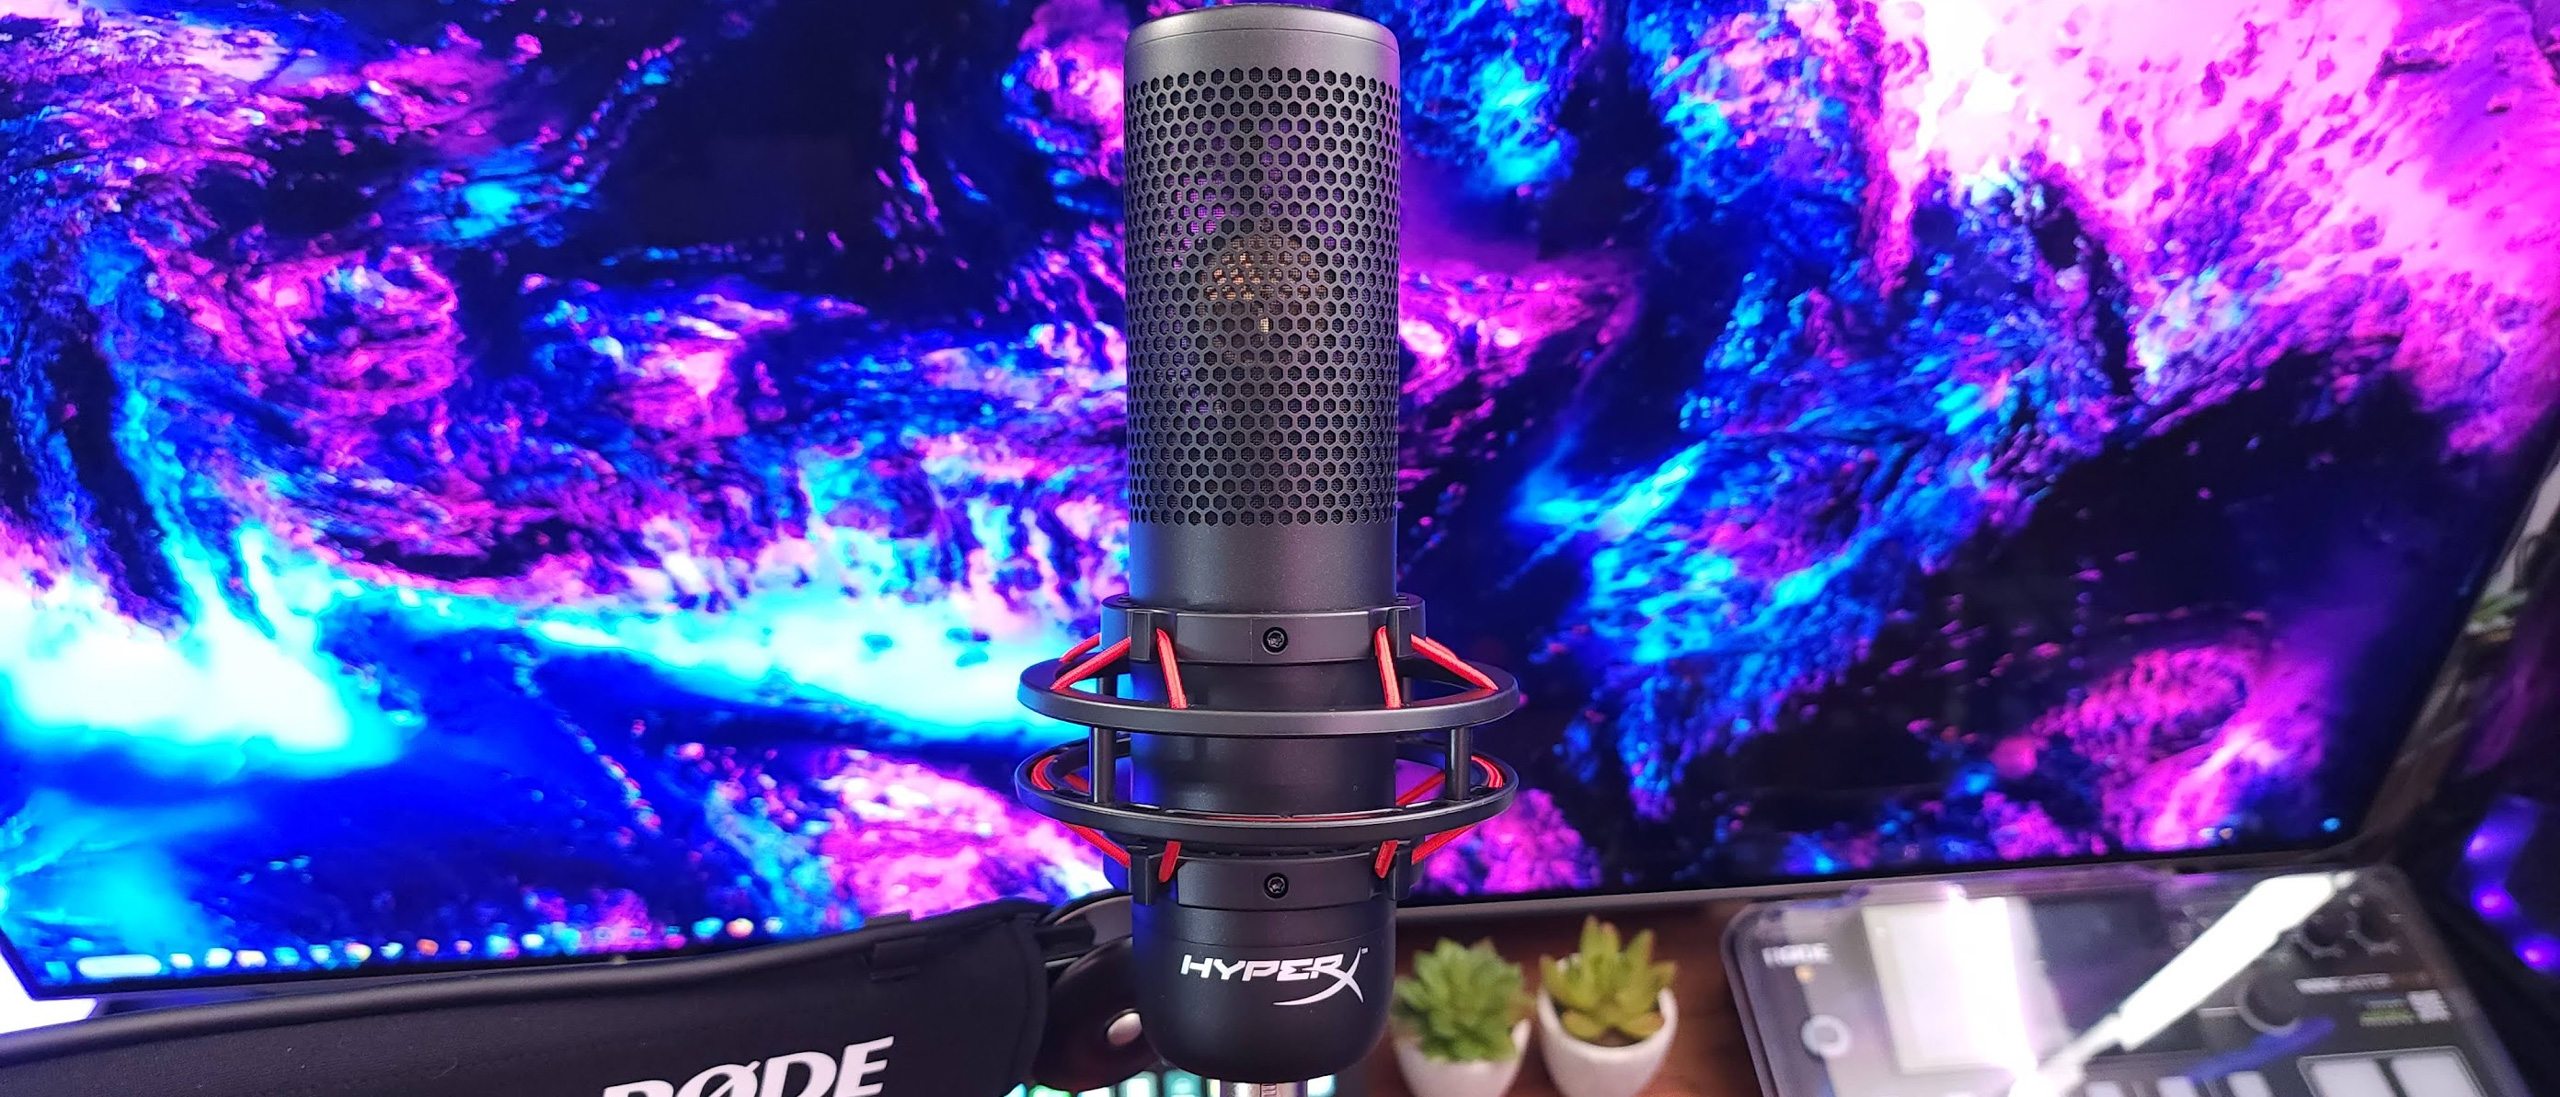 HyperX QuadCast microphone review: Great value for gamers and streamers